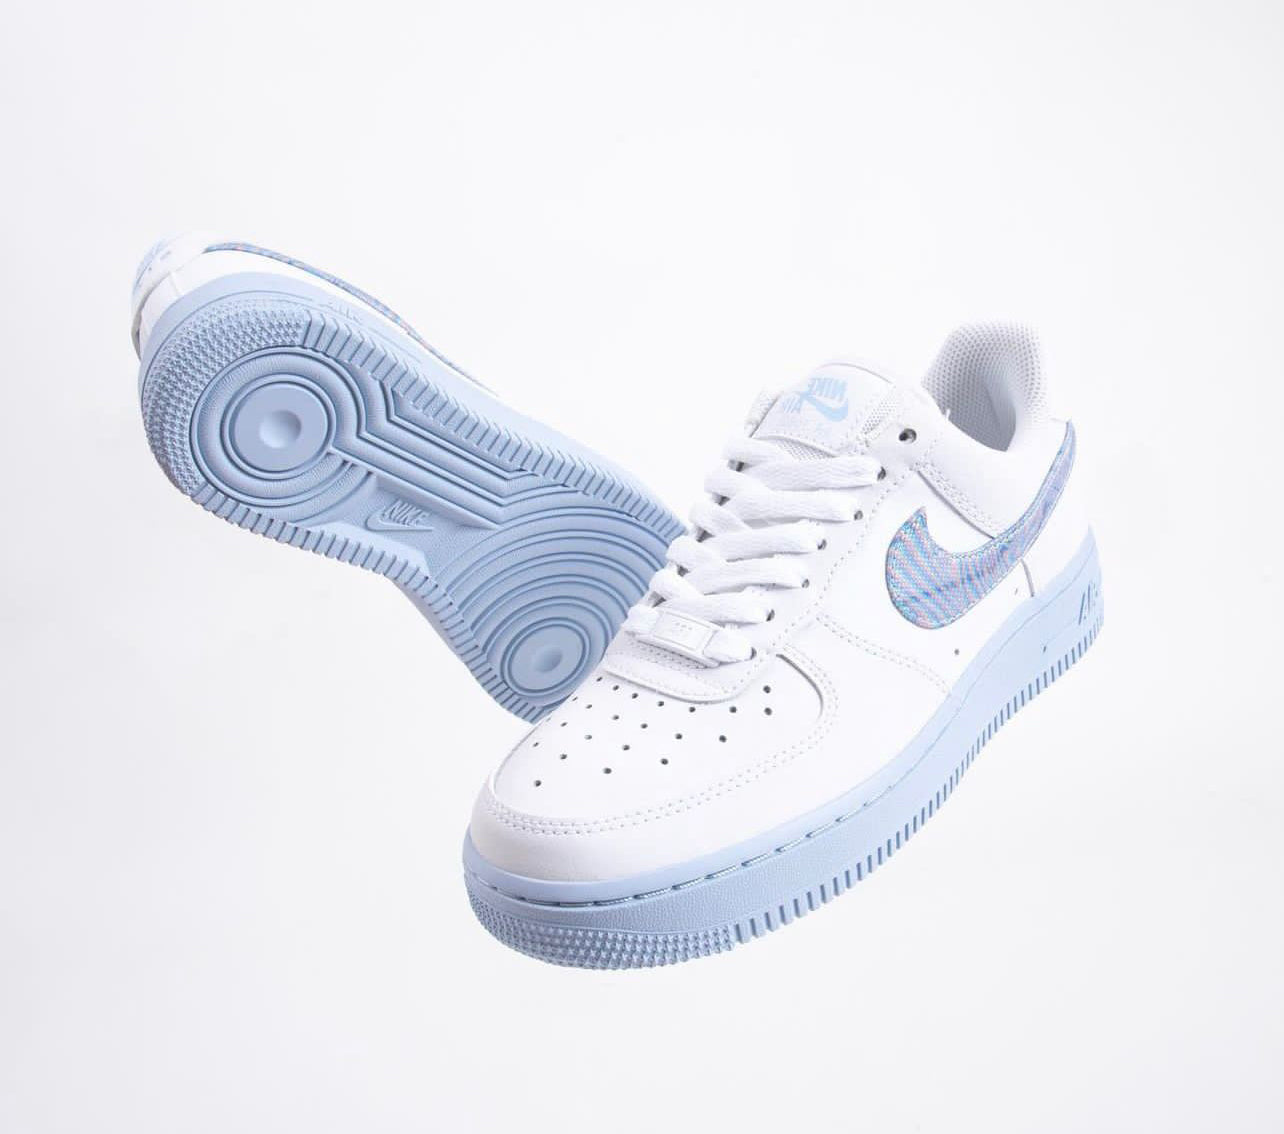 Nike First Copy Shoe Airforce 1 White/Blue